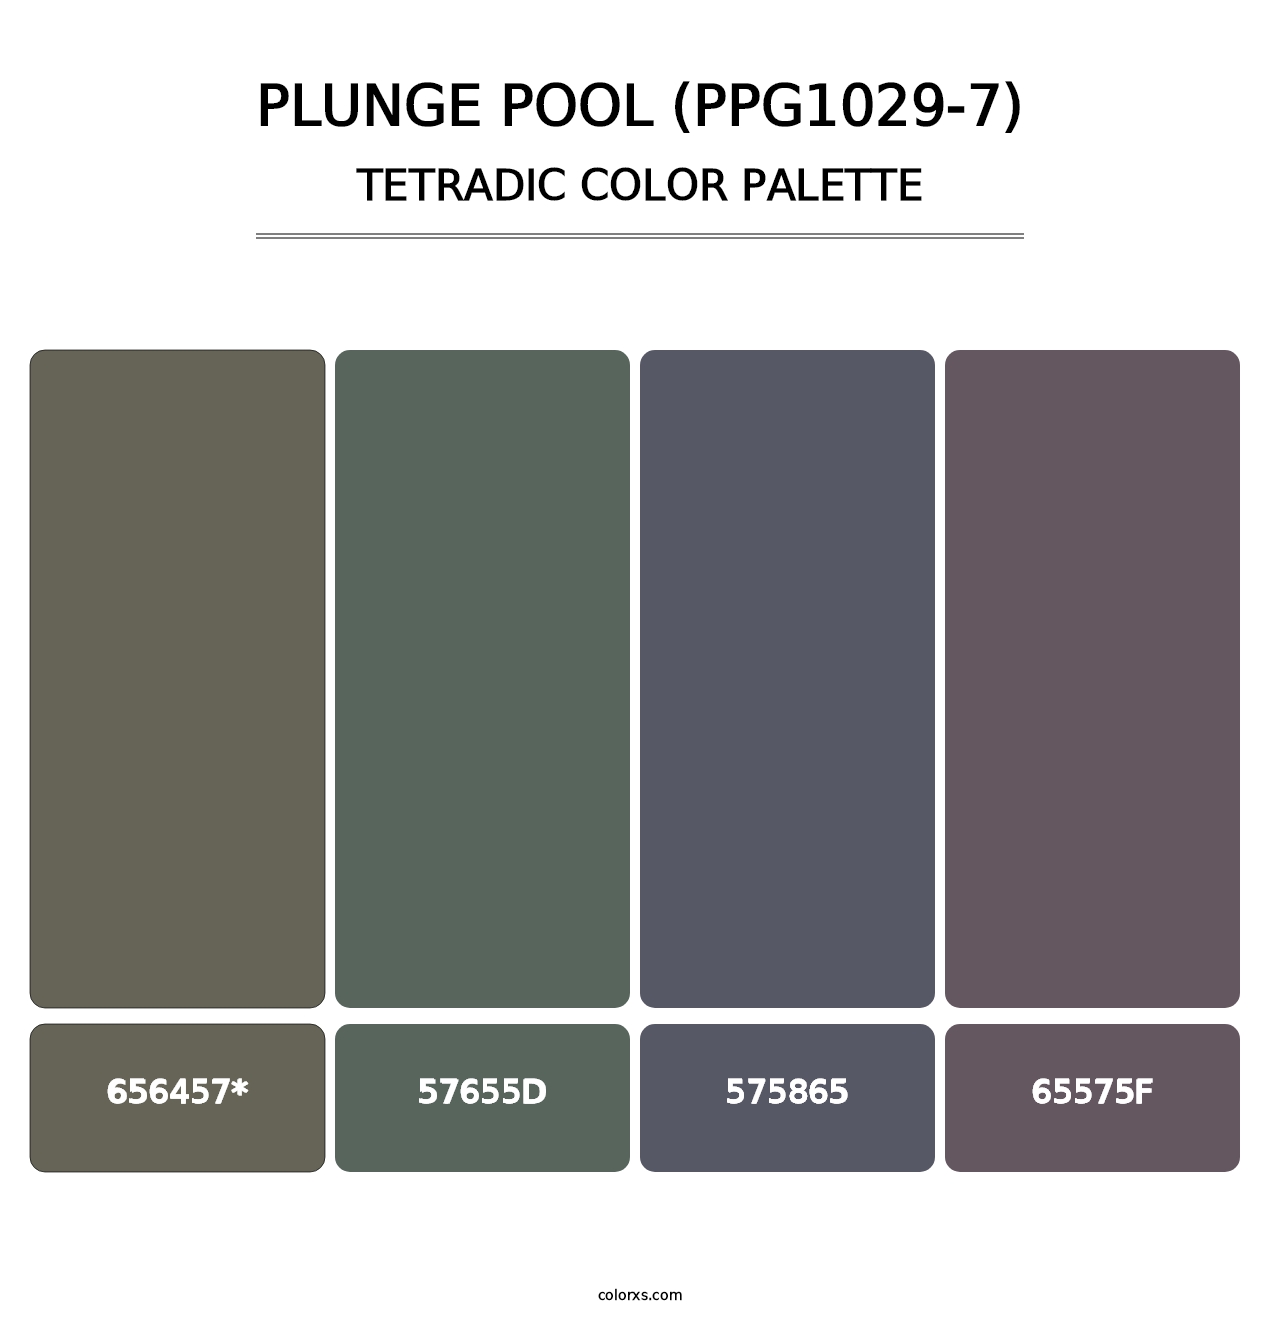 Plunge Pool (PPG1029-7) - Tetradic Color Palette